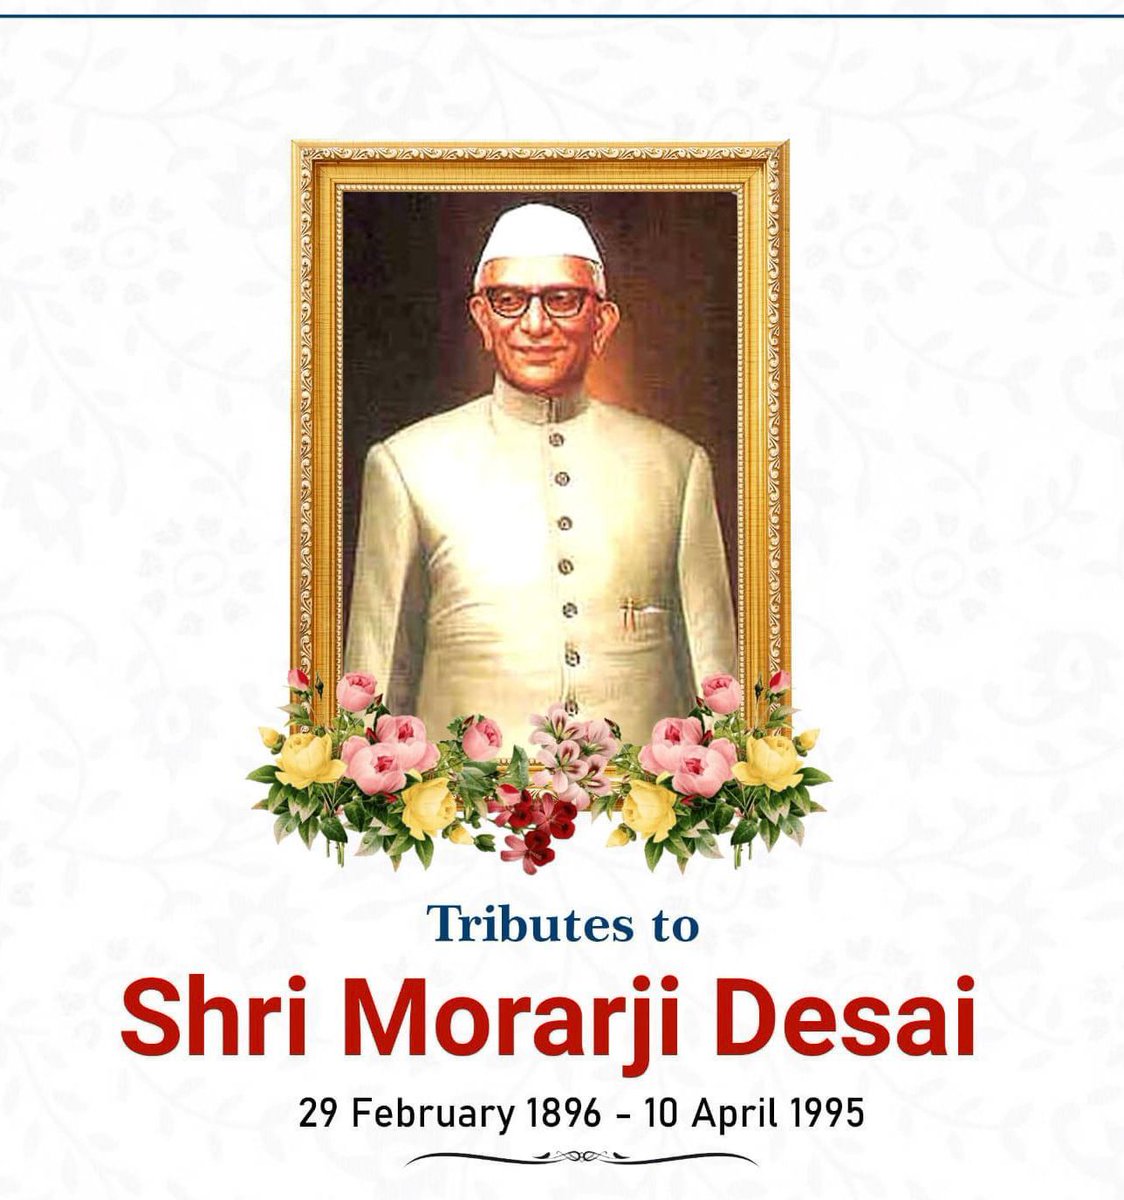 Humble greetings to former Prime Minister, great freedom fighter Bharat Ratna Morarji Desai ji on his memorial day. His contributions to the nation will always be remembered.